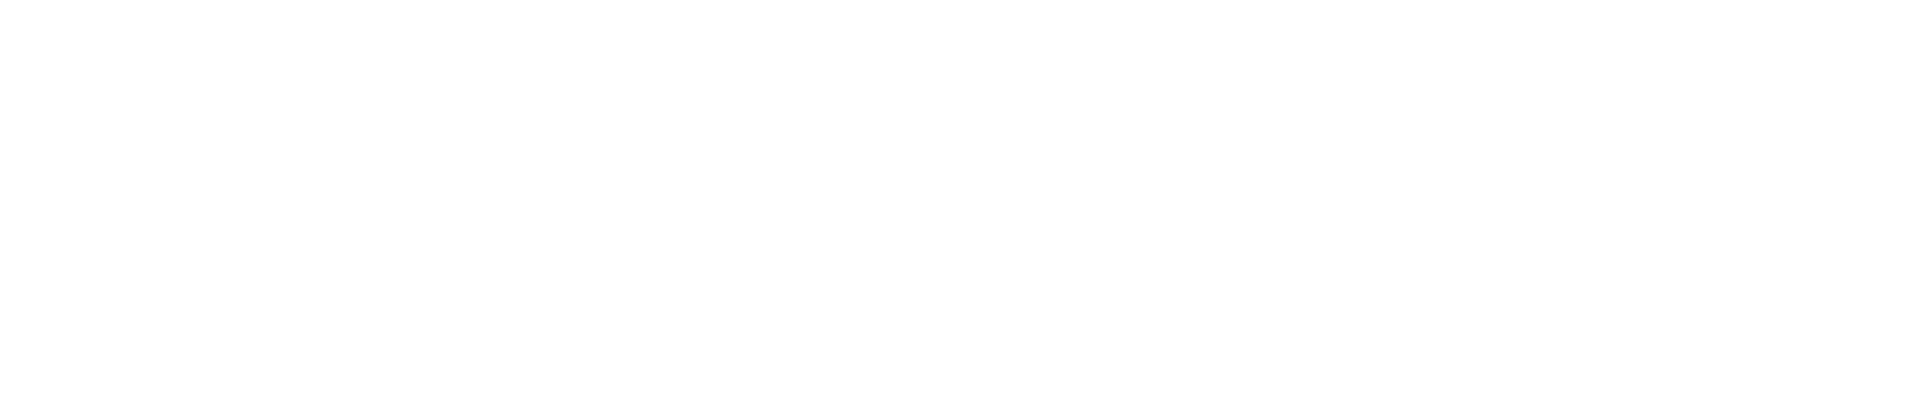 cup of tea : guesthouse 飛騨高山